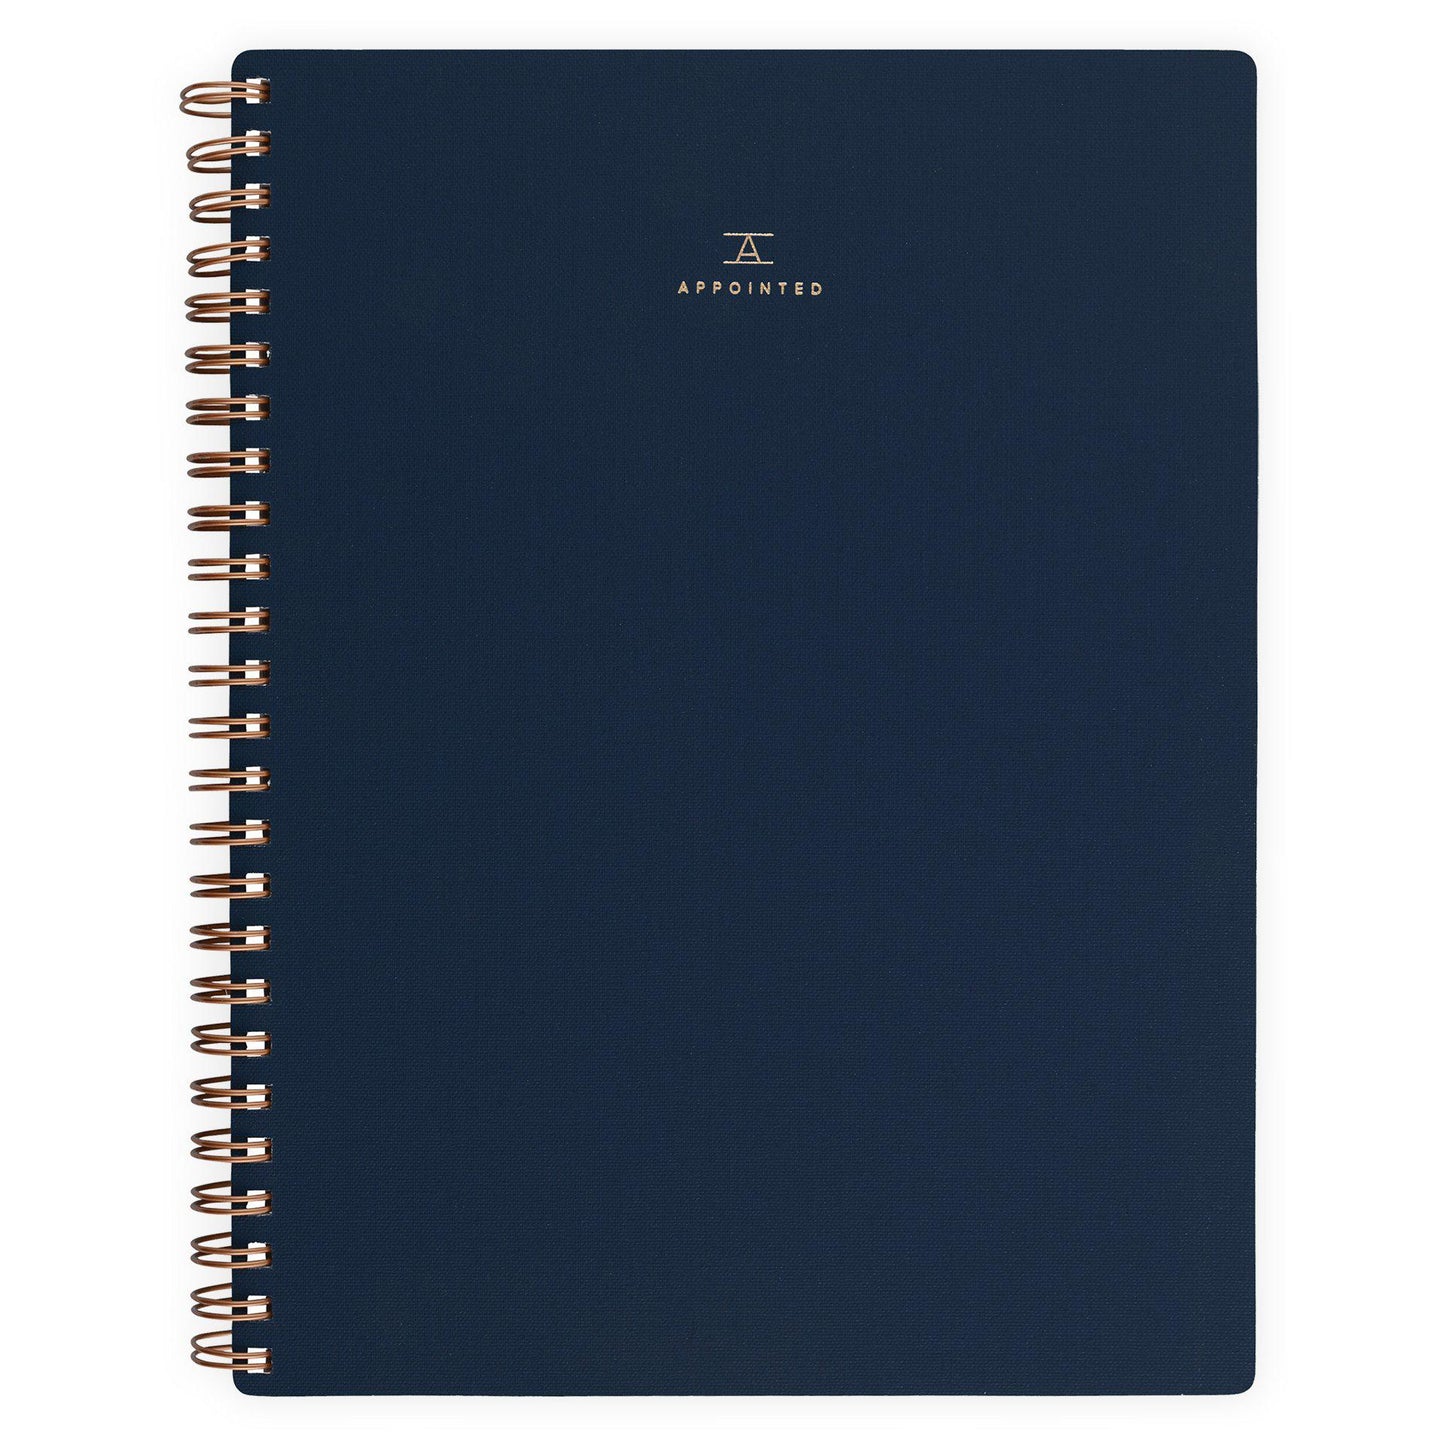 Appointed Oxford Blue Workbook | Lined or Grid 